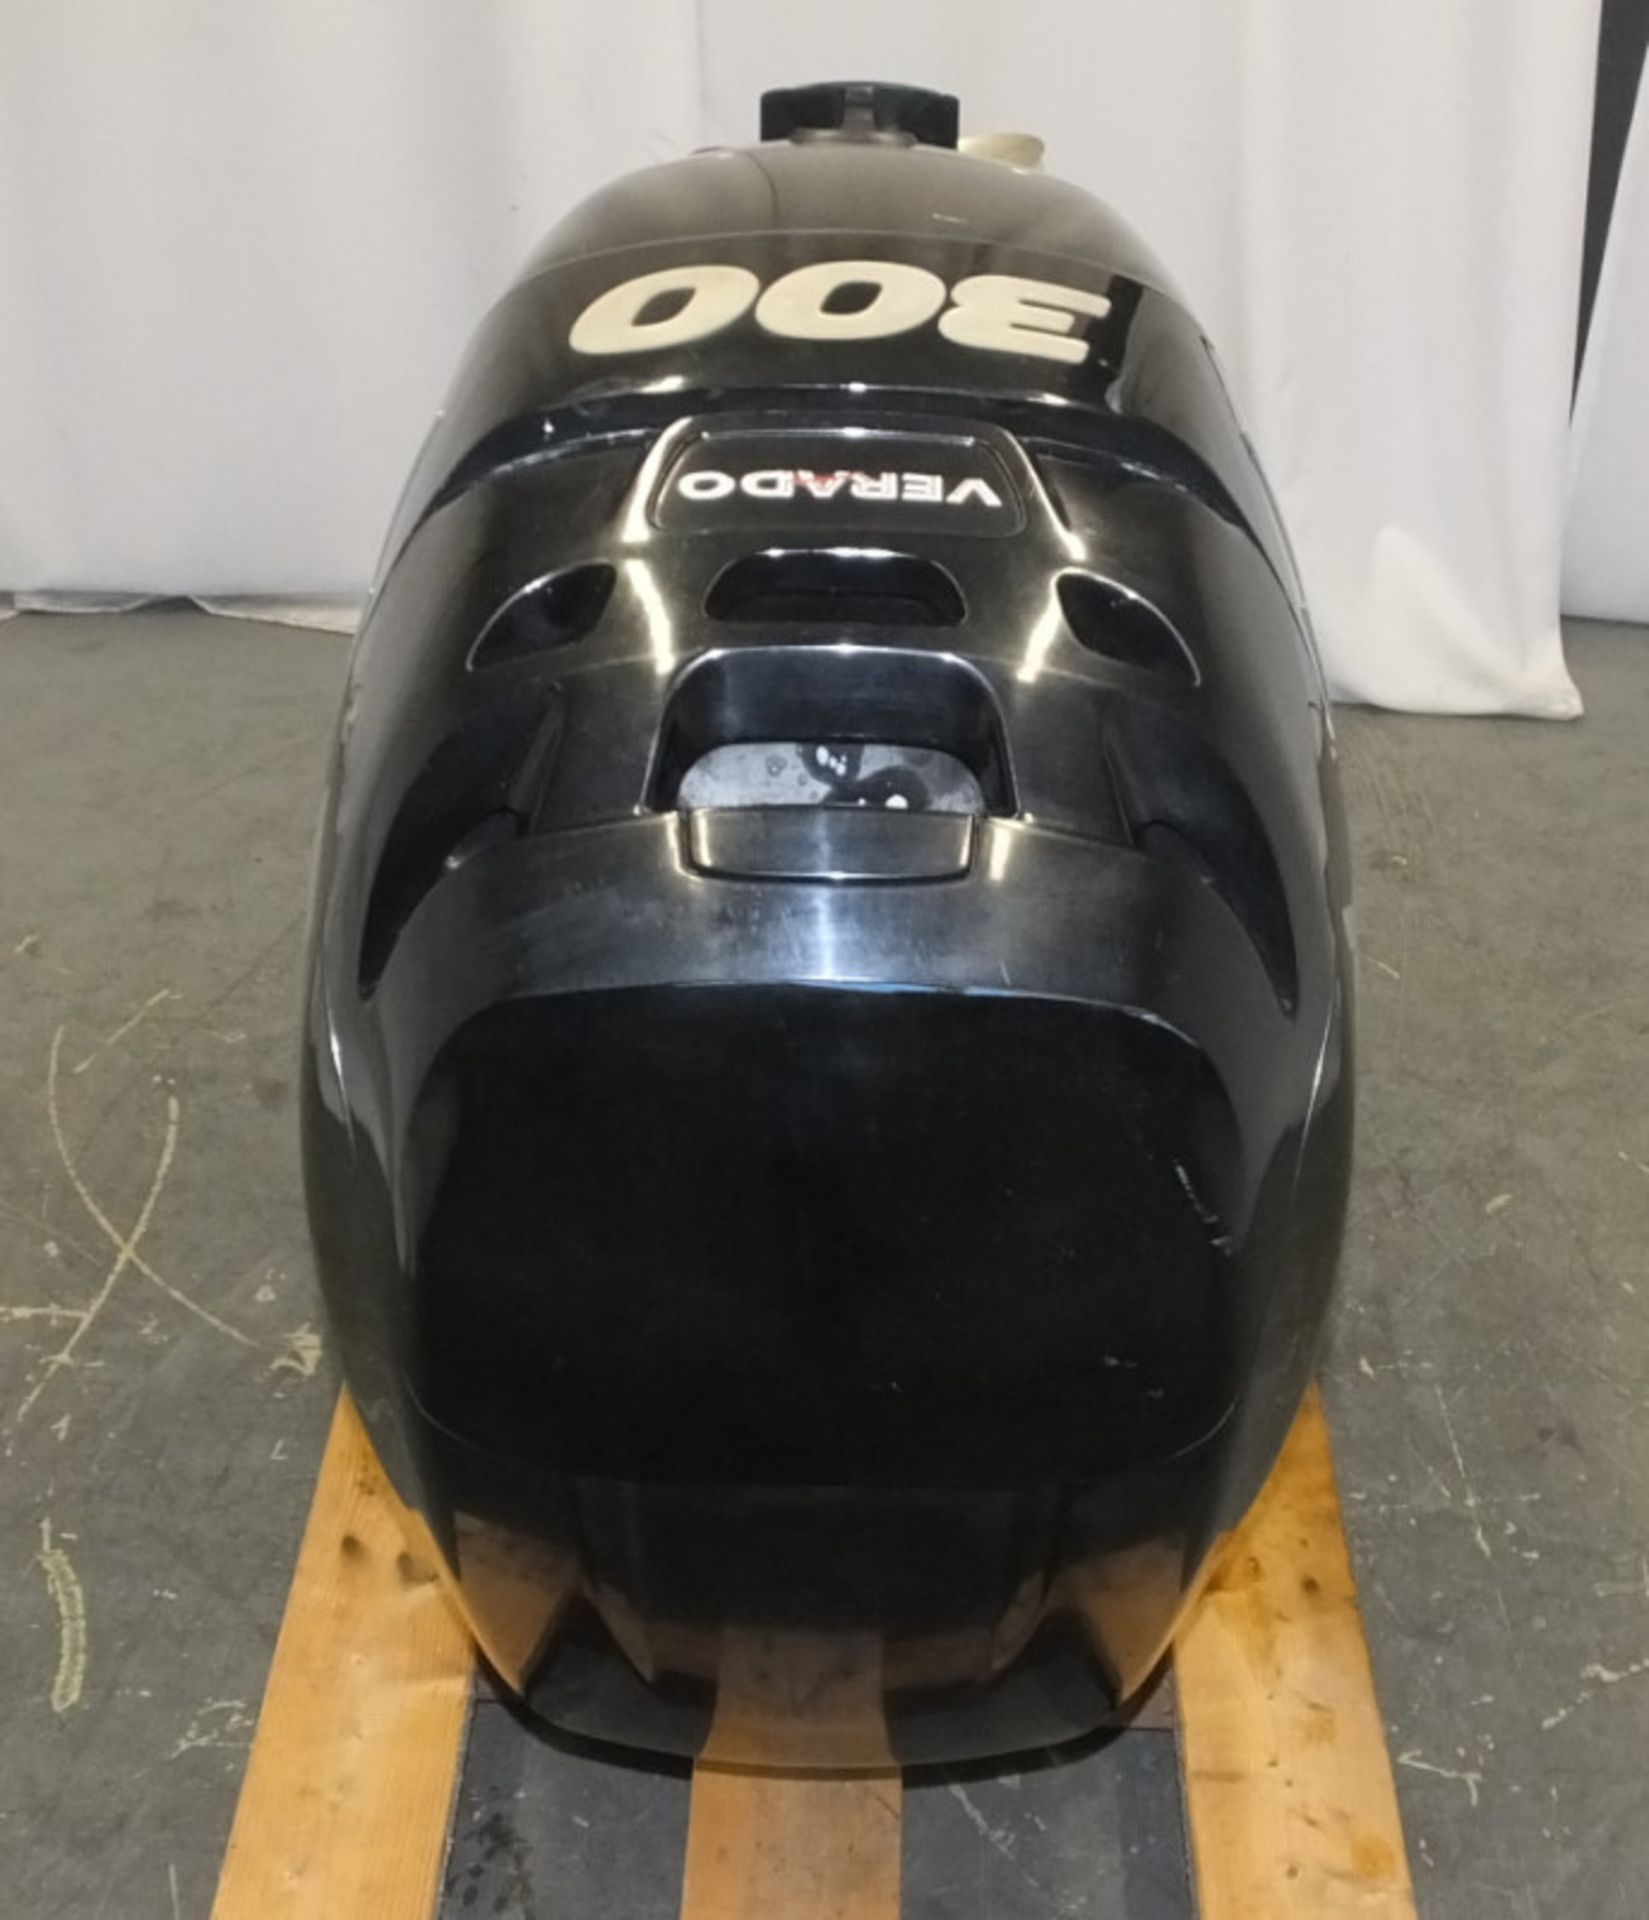 Mercury Verado Outboard engine 2008 - 300XL L6 - serial 1B689399 - hours run 690 - can be - Image 8 of 18